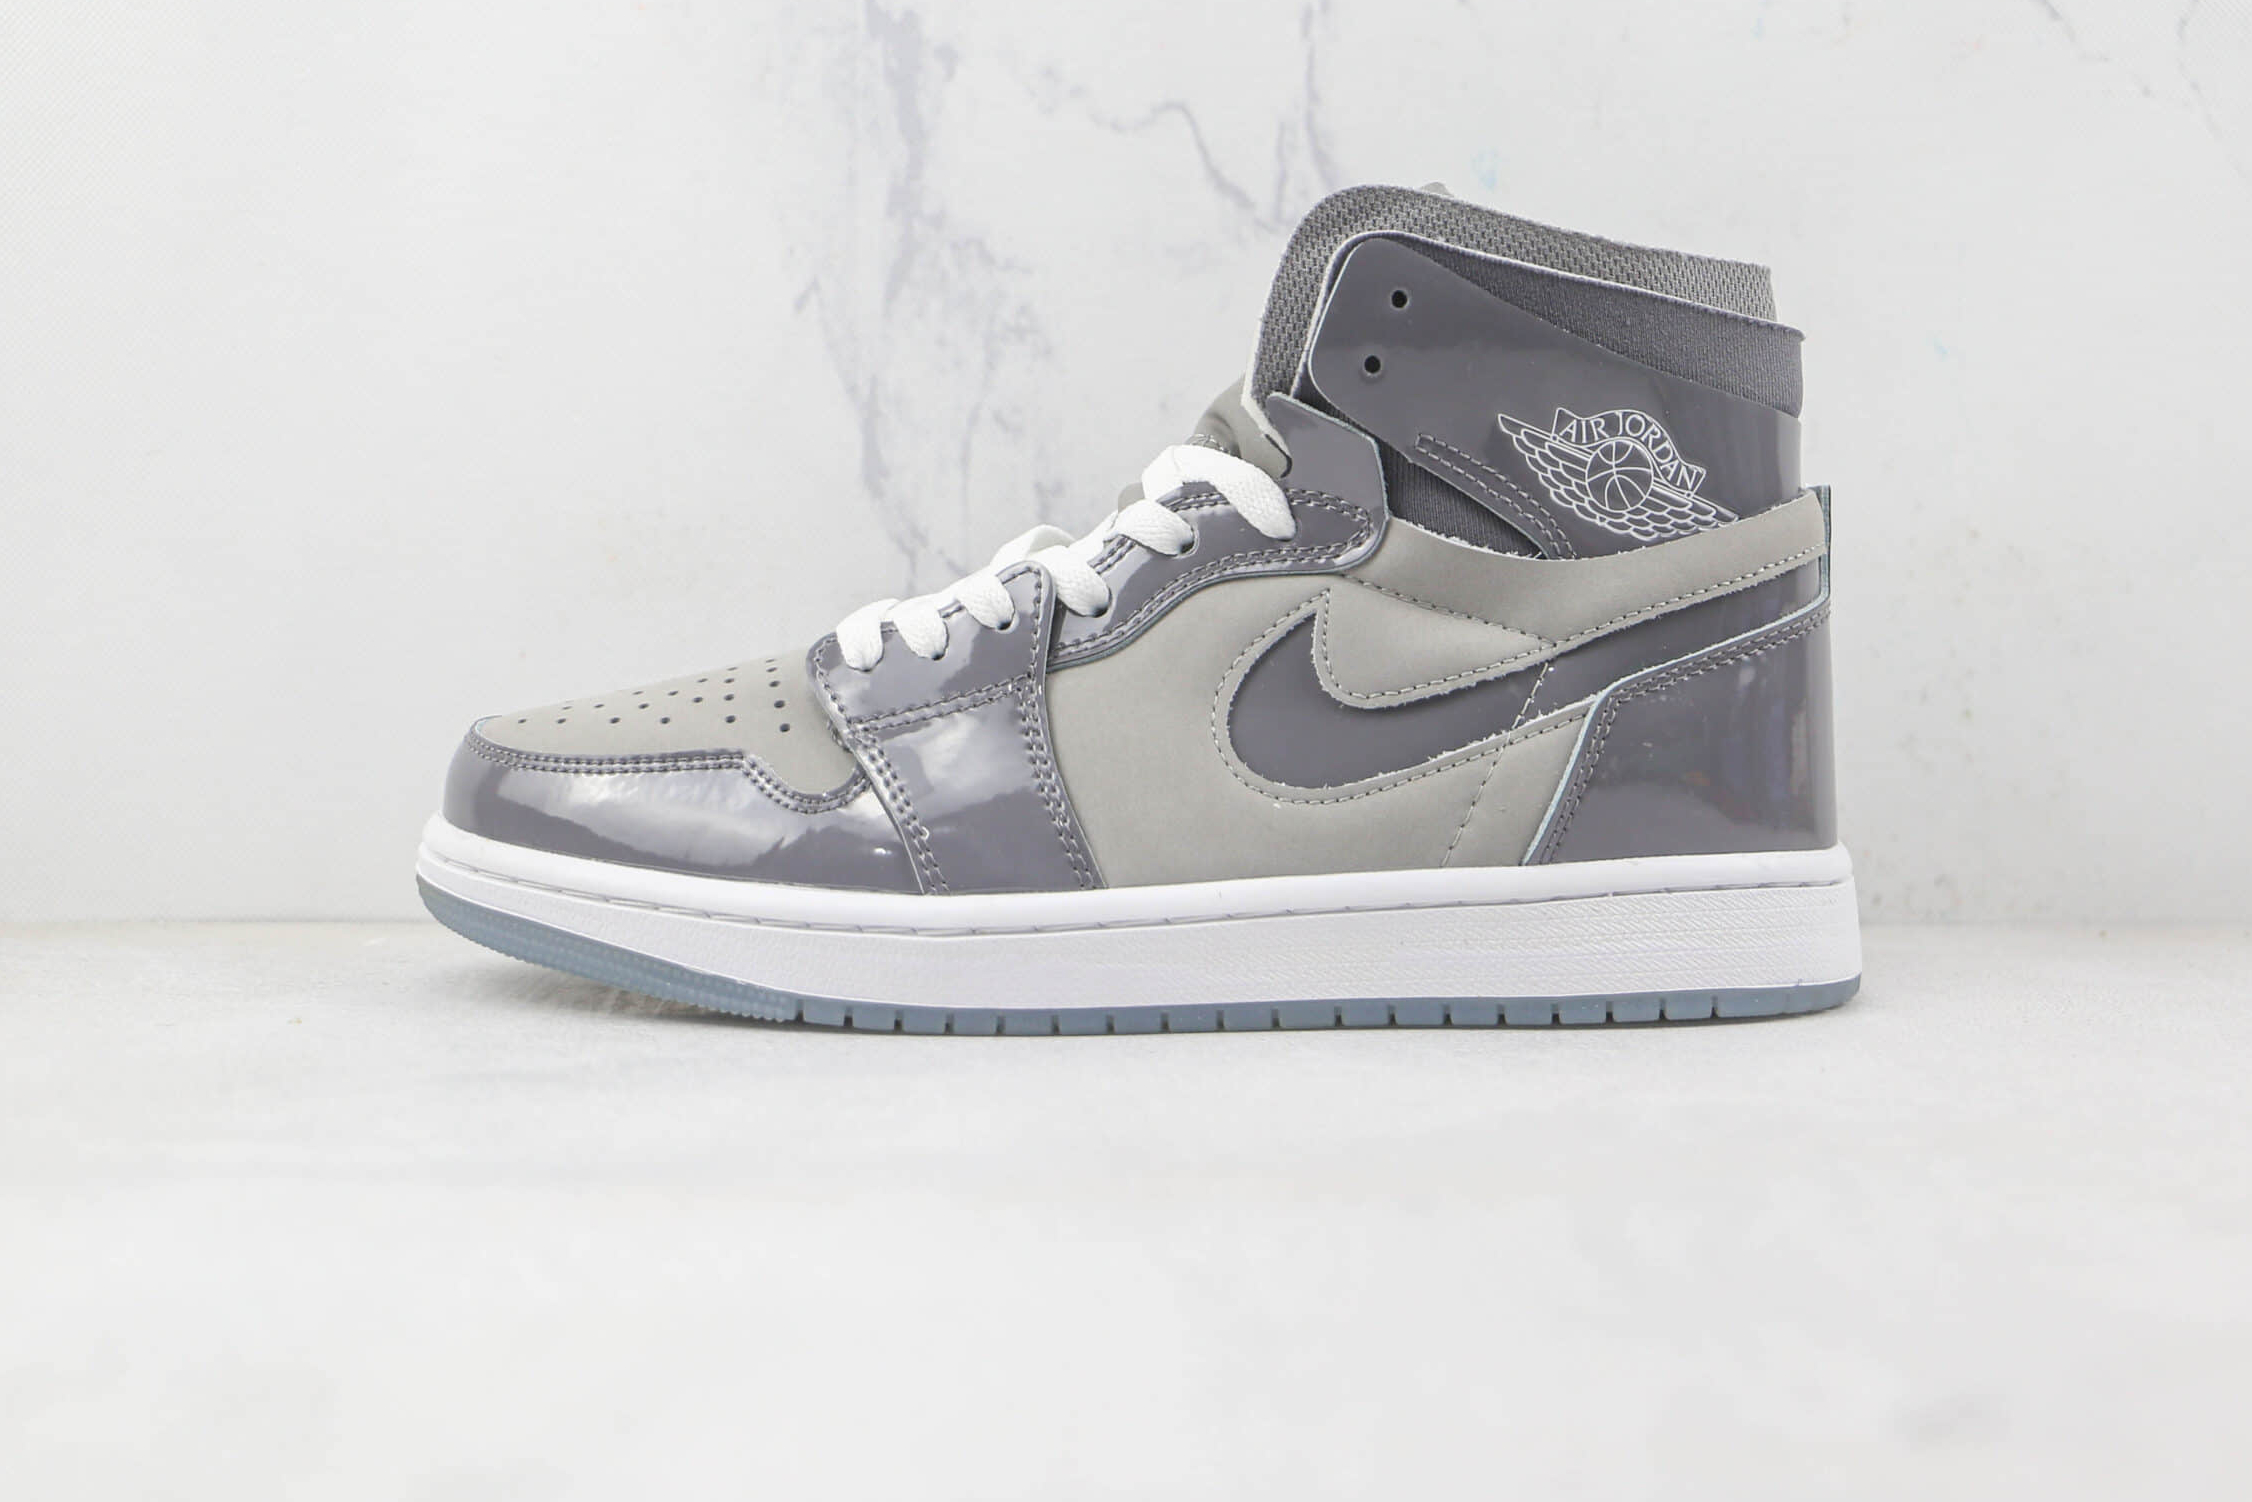 Air Jordan 1 Zoom CMFT Patent Leather Grey White DQ0659-005 - Premium Comfort and Style